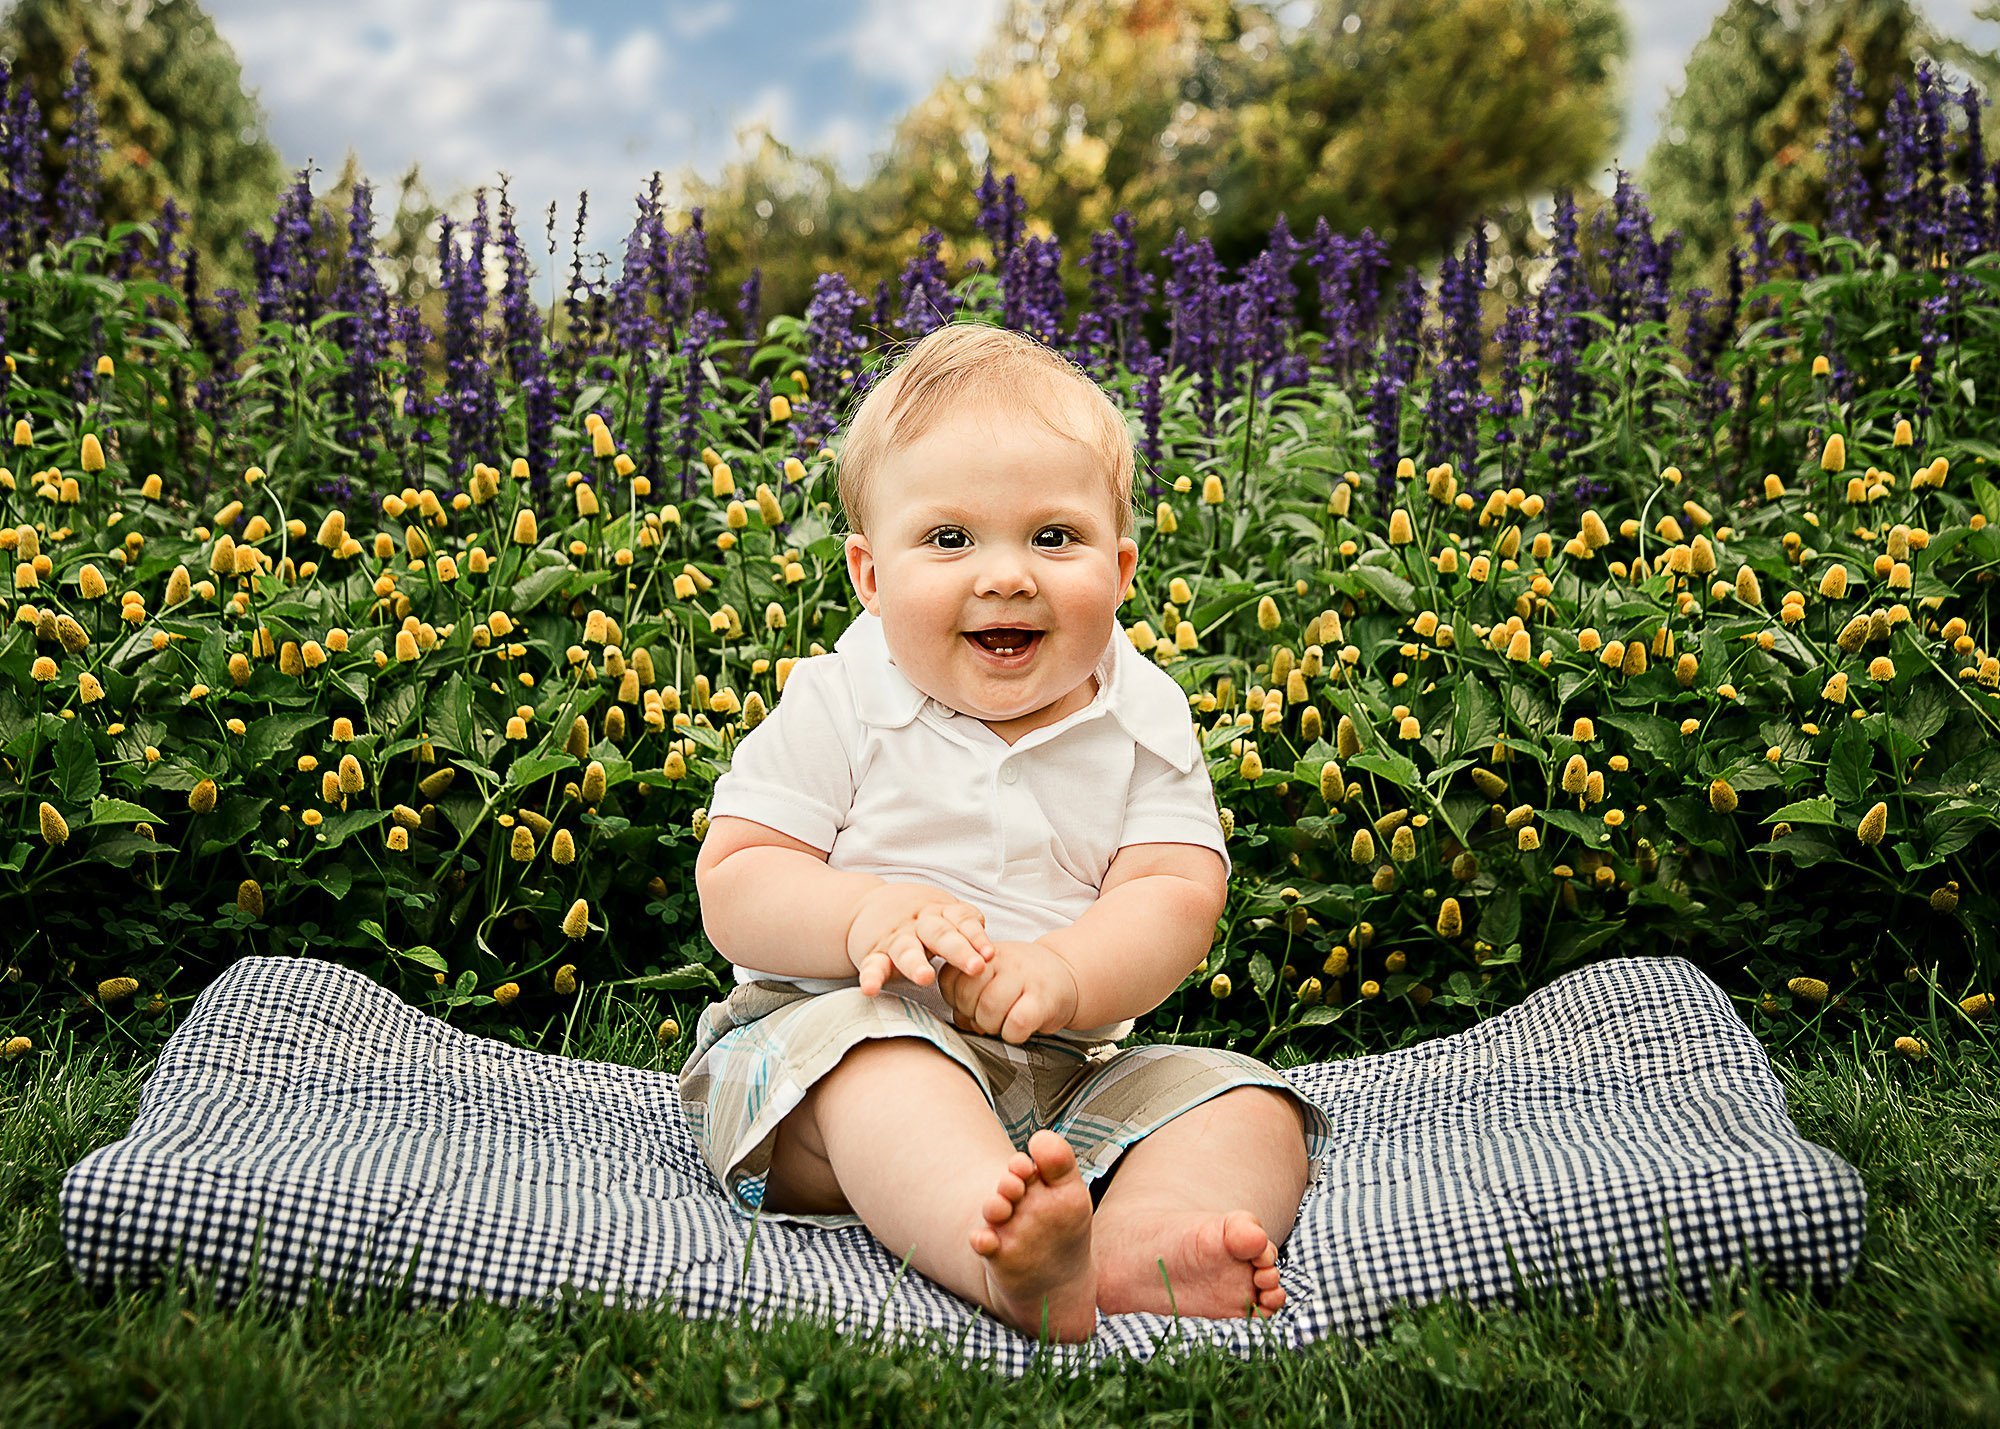 Joyful 6 month old boy sitting up in the garden with a big smile